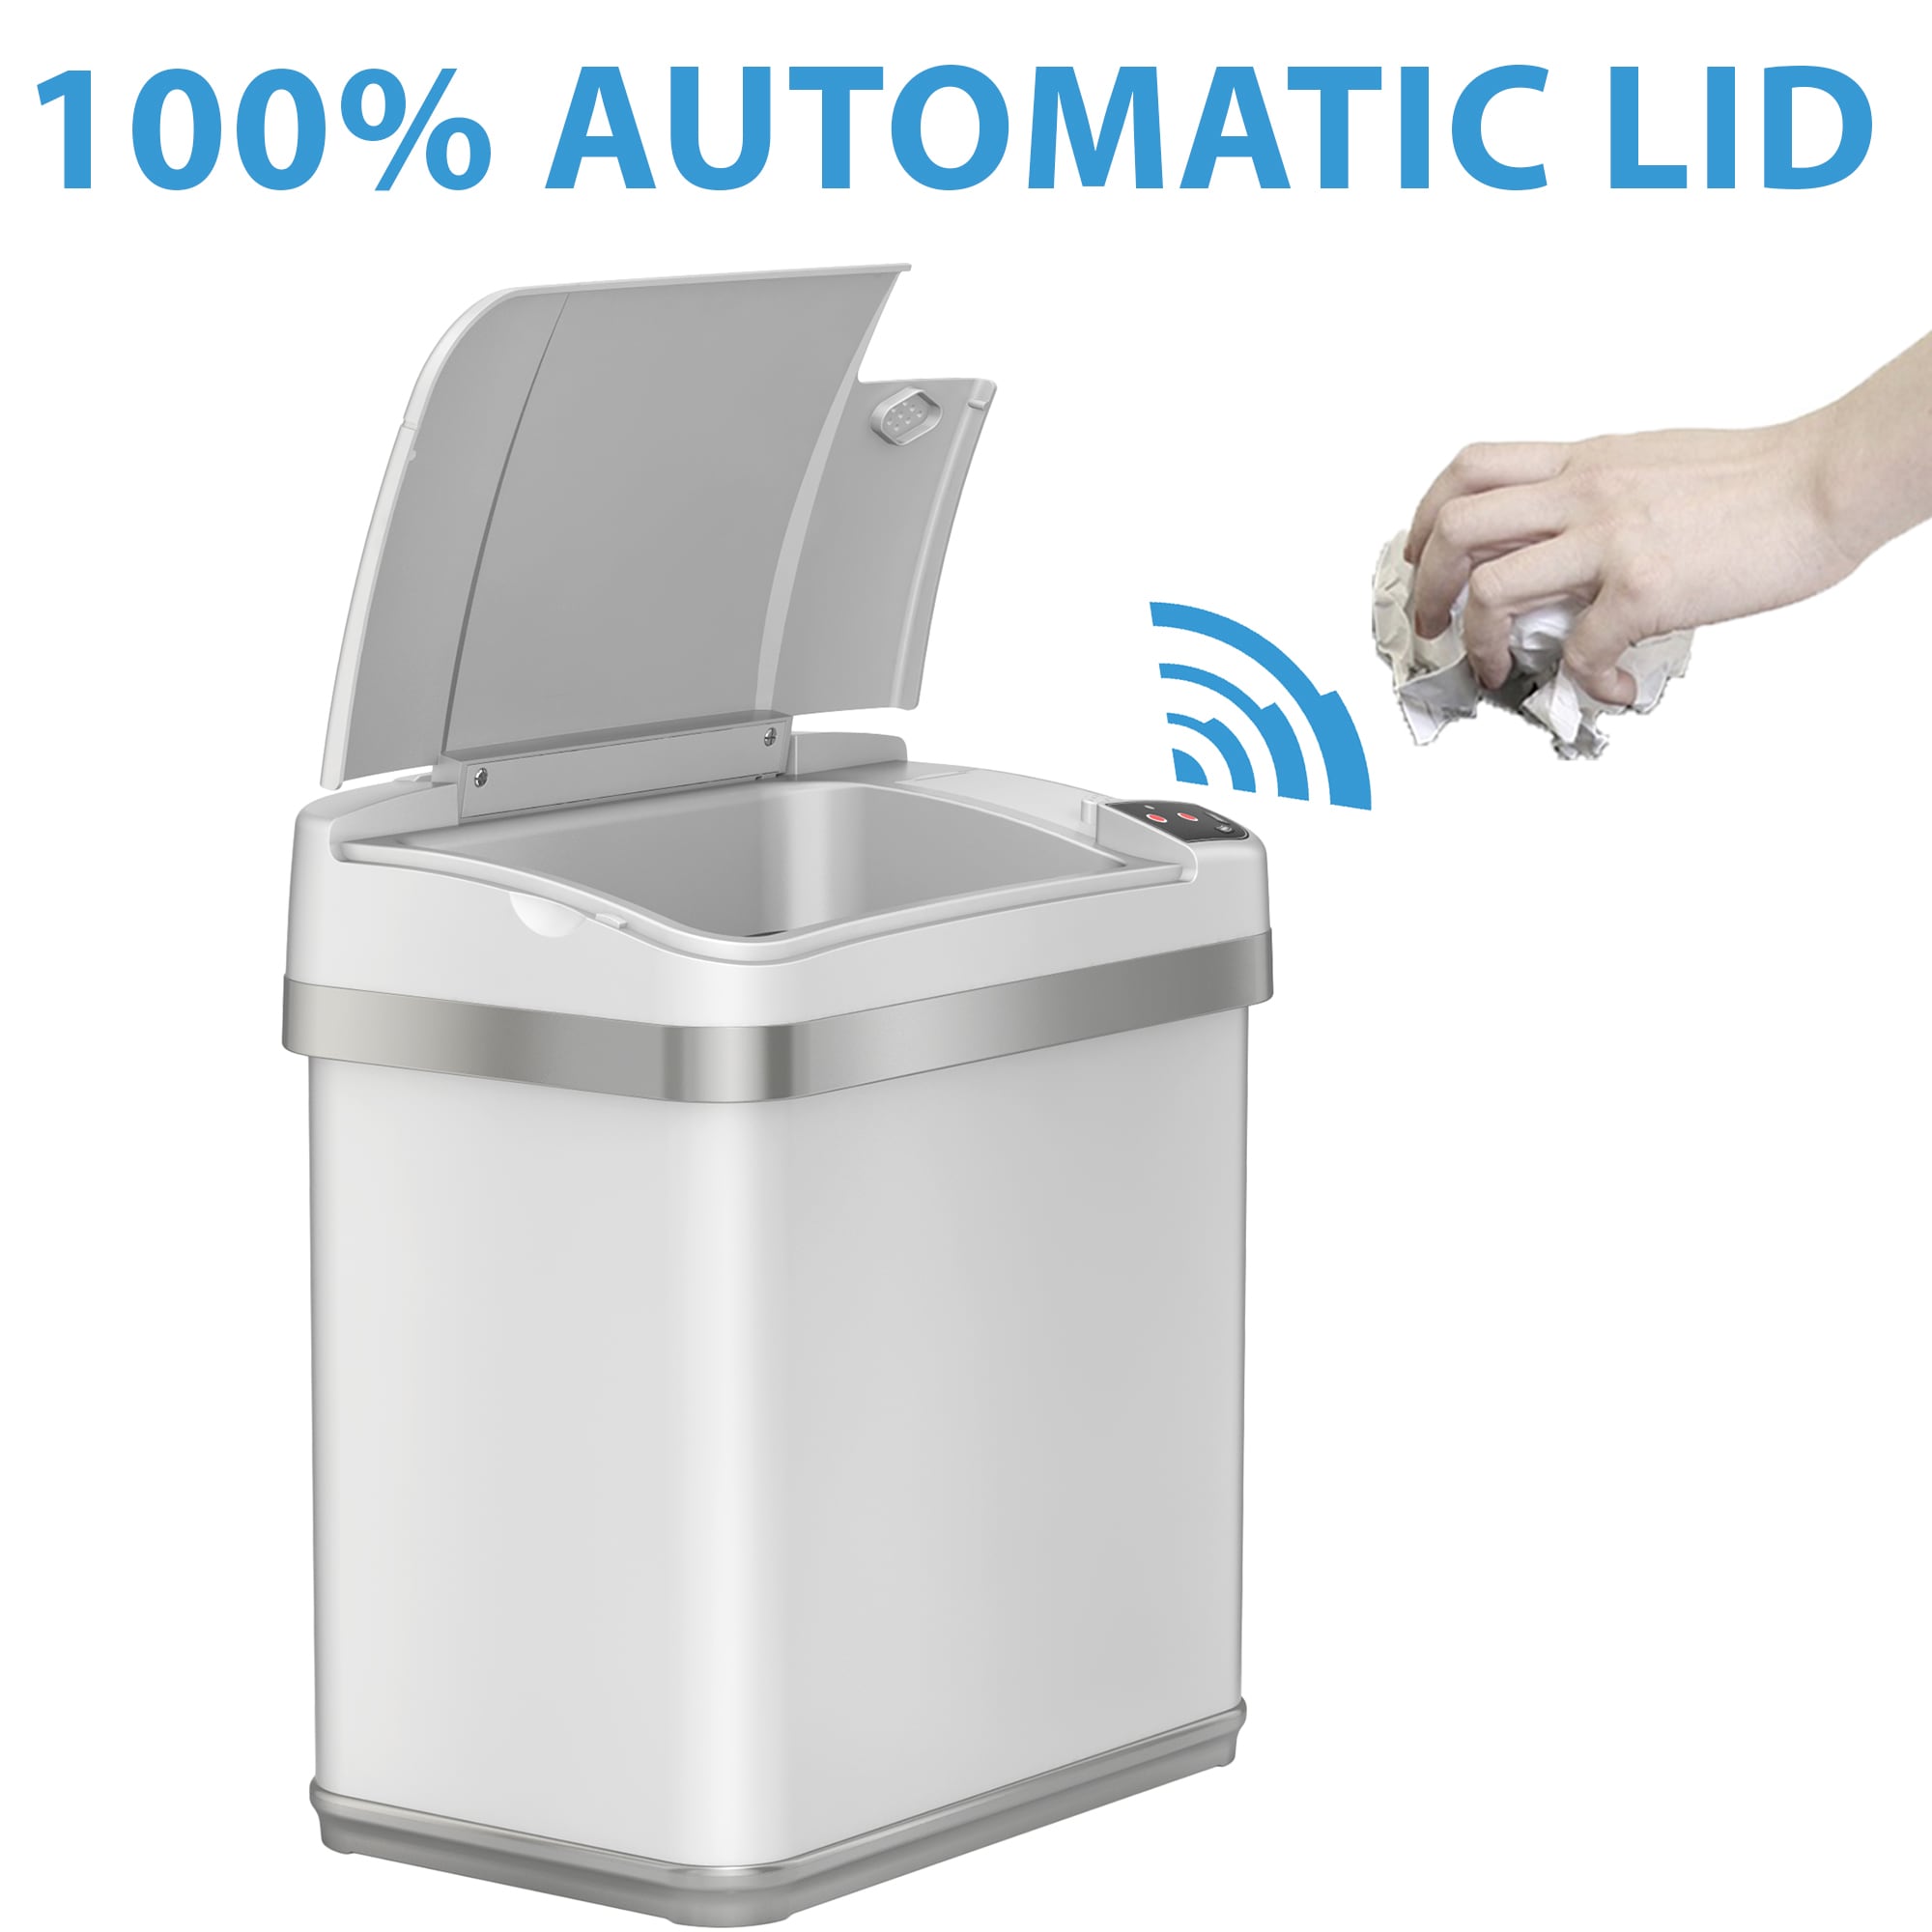 Kraus KTCS-10SS 13 Gallon Touchless Motion Sensor Trash Can - Stainless Steel